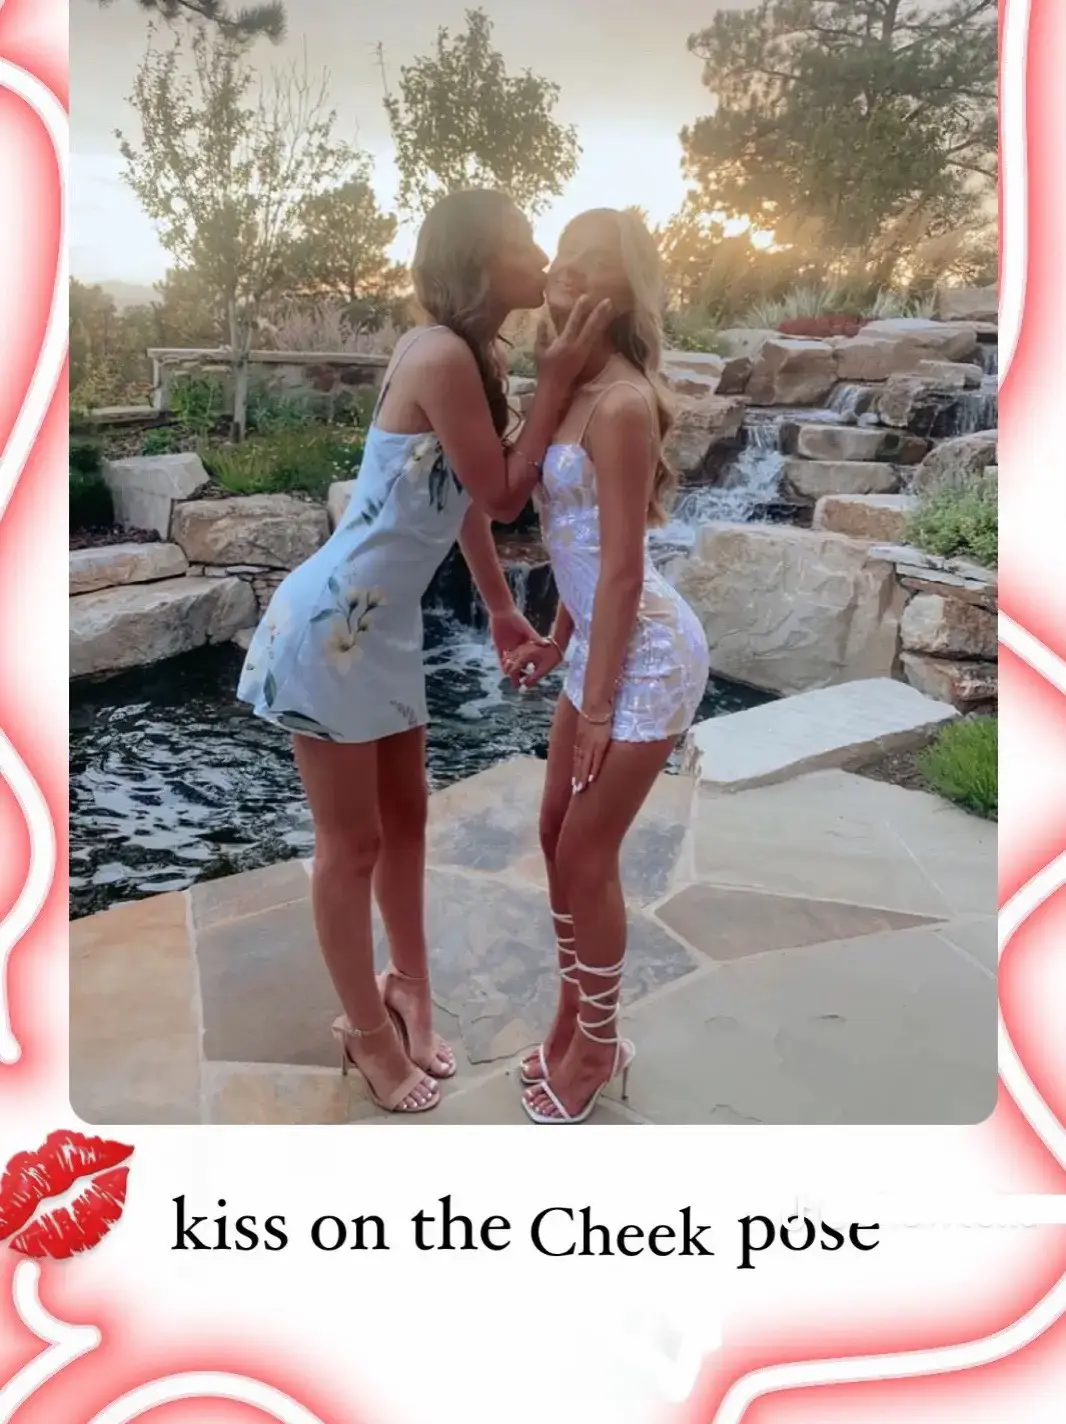  Two women are posing for a picture, and they are both wearing dresses. They are standing near a pool, and there is a pink background with a flower design. The words " kiss on the cheek